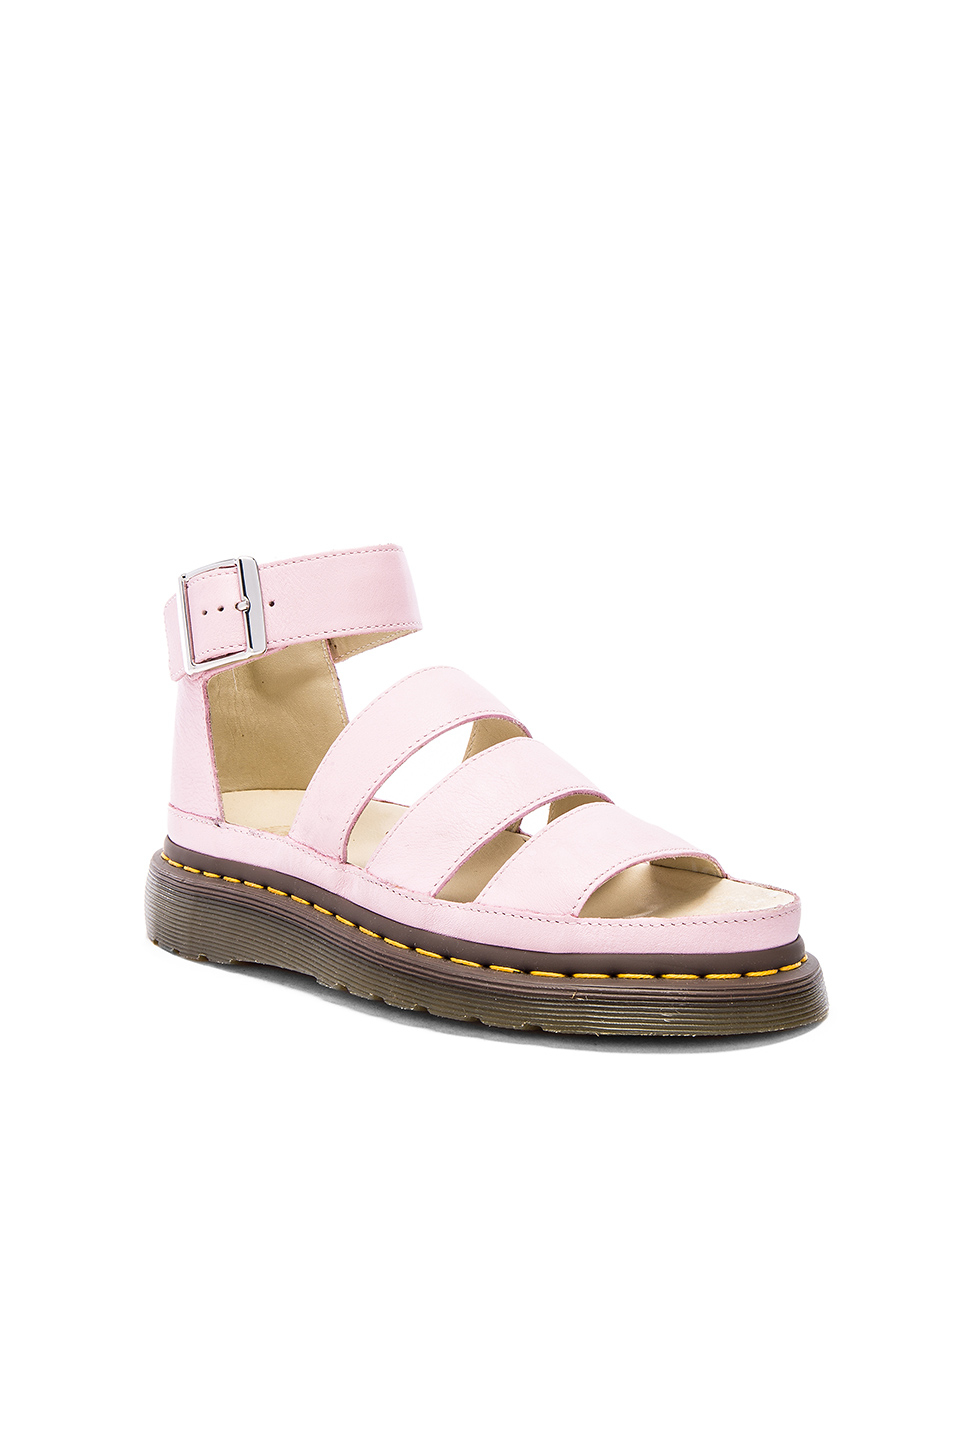 Dr. Martens Leather Clarissa Chunky Strap Sandal in Bubblegum (Pink) - Lyst